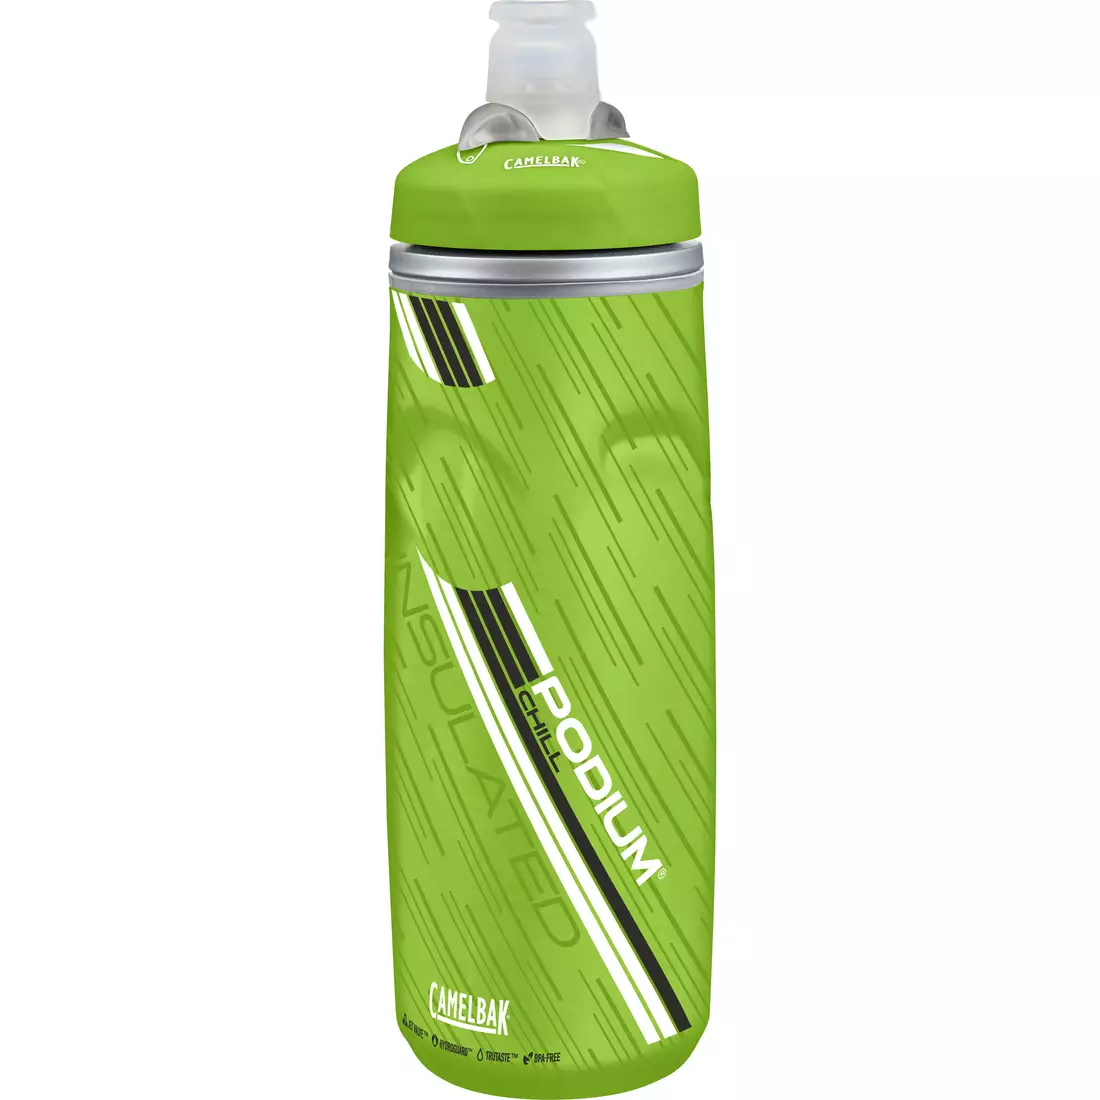 Camelbak SS17 Thermal Cycling Water Bottle Podium Chill 21oz/620ml Sprint Green